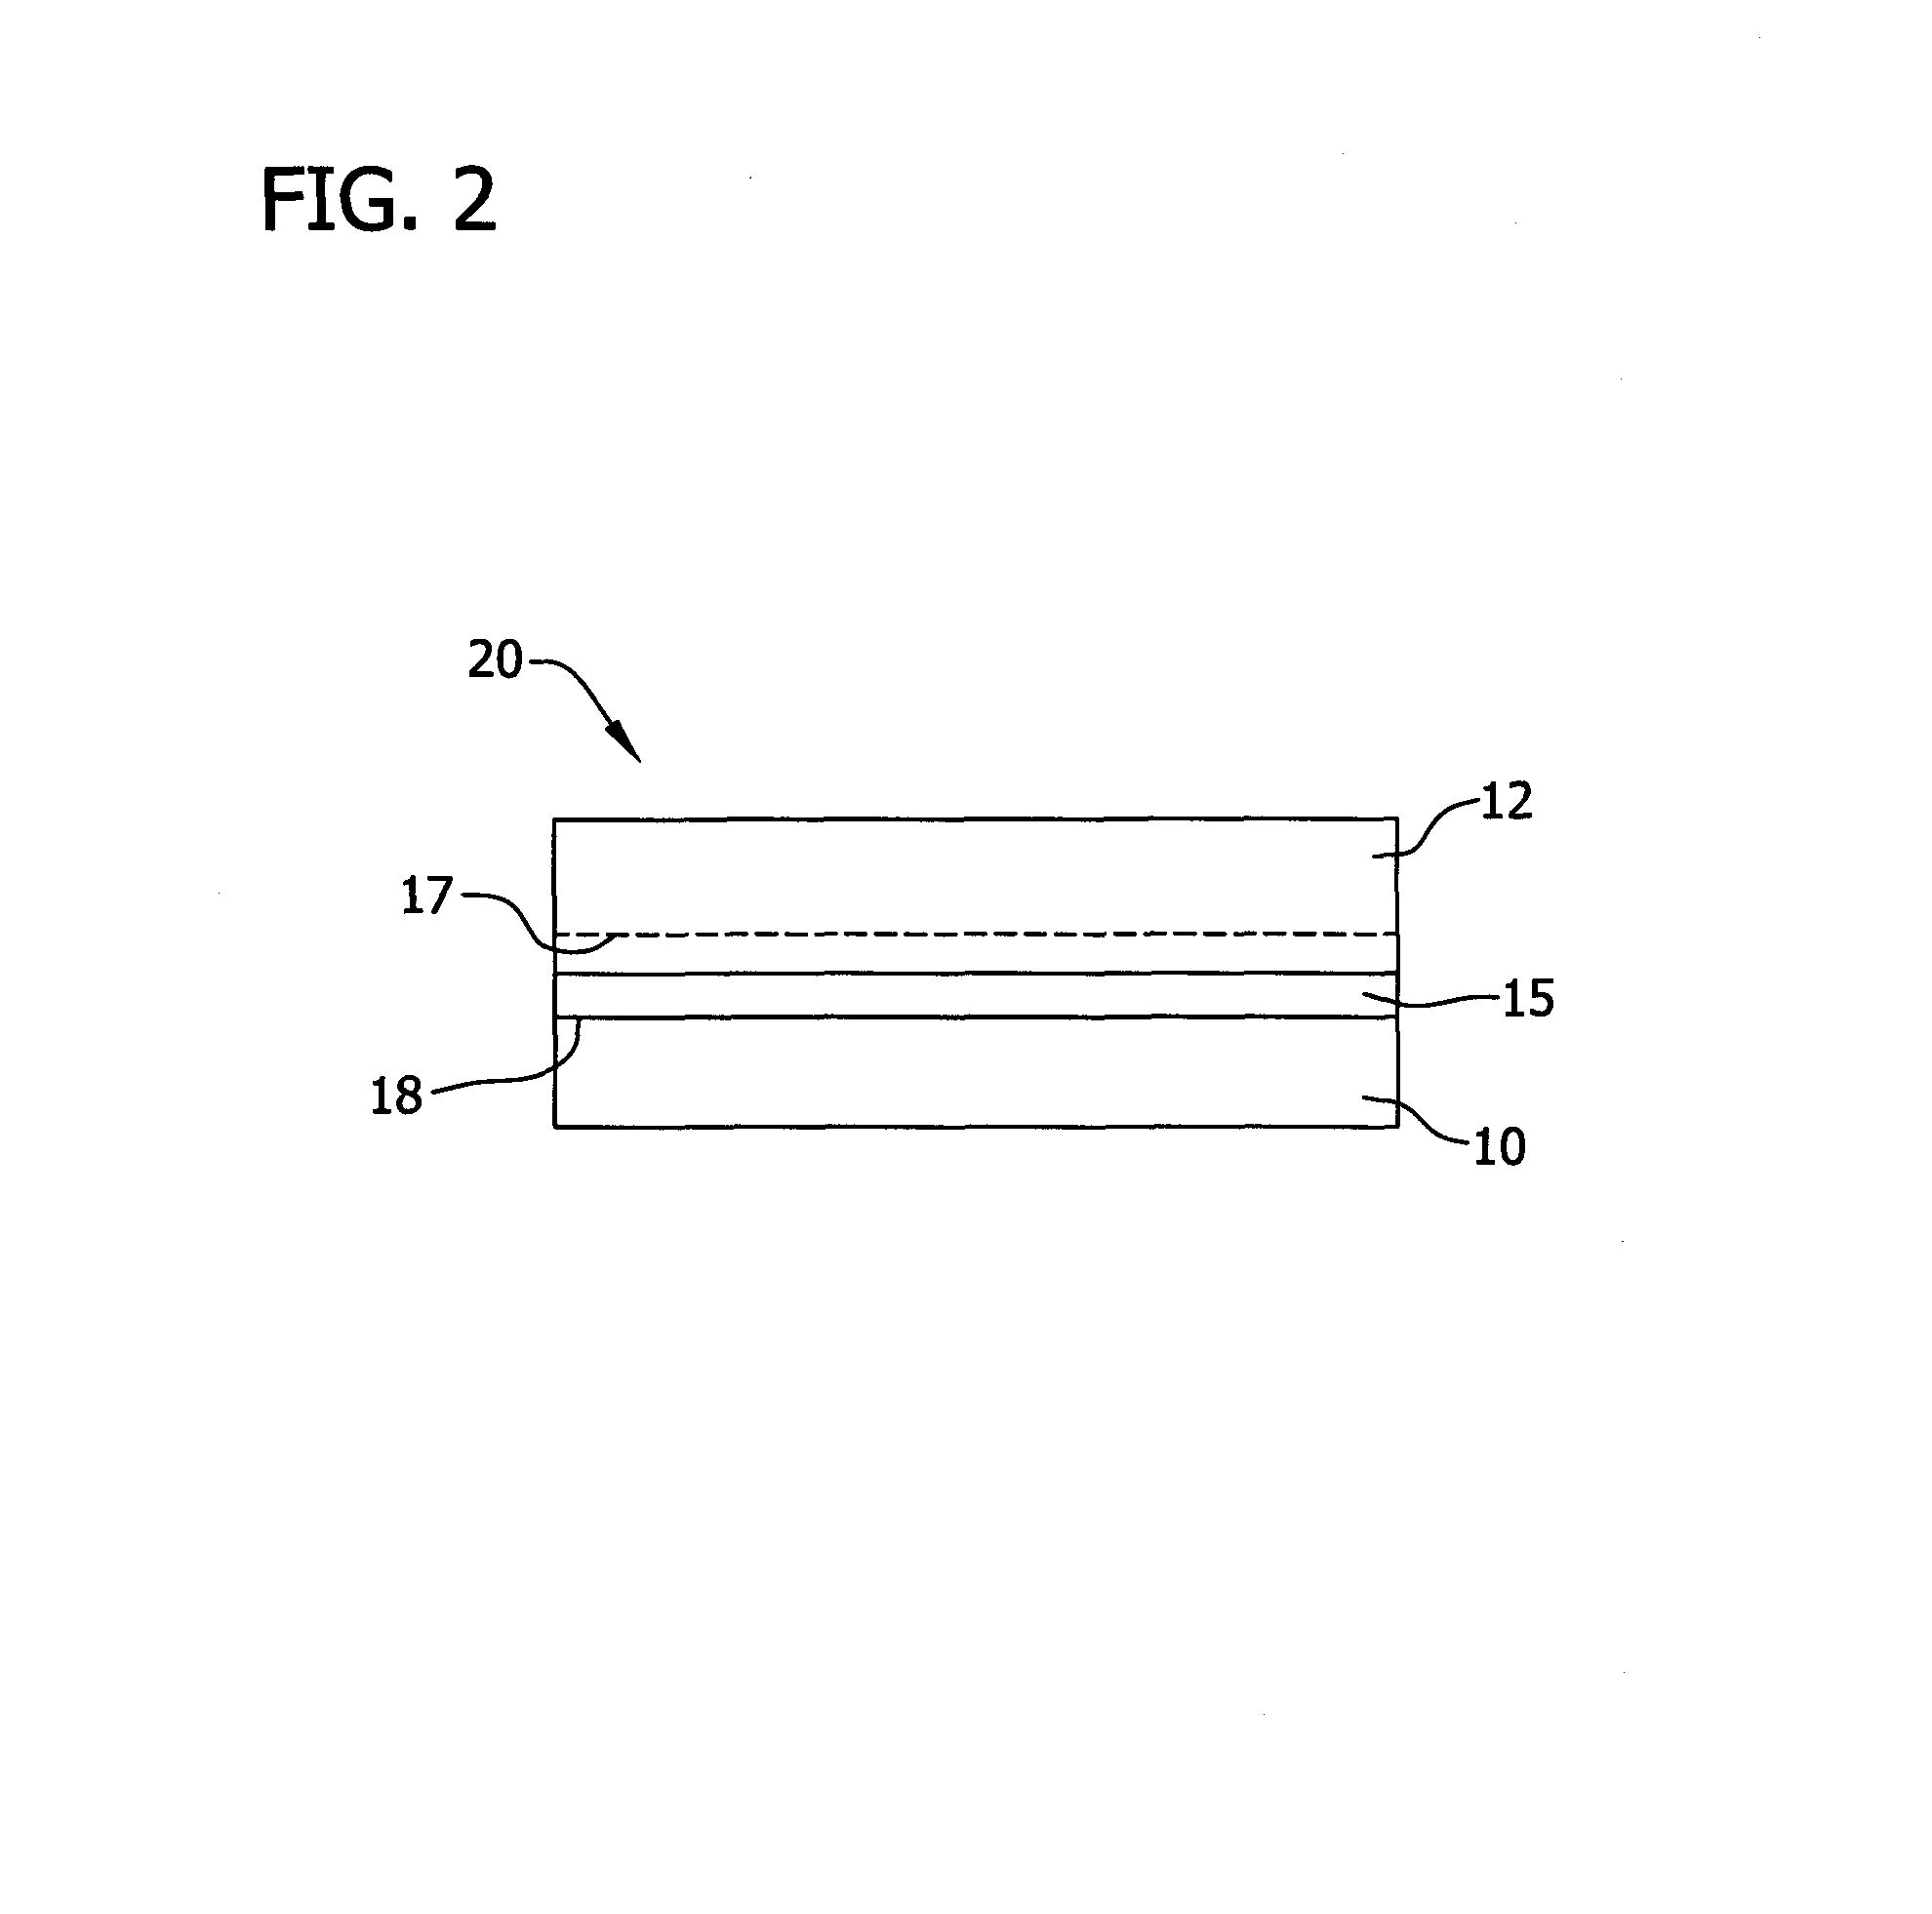 Methods for reducing the width of the unbonded region in SOI structures